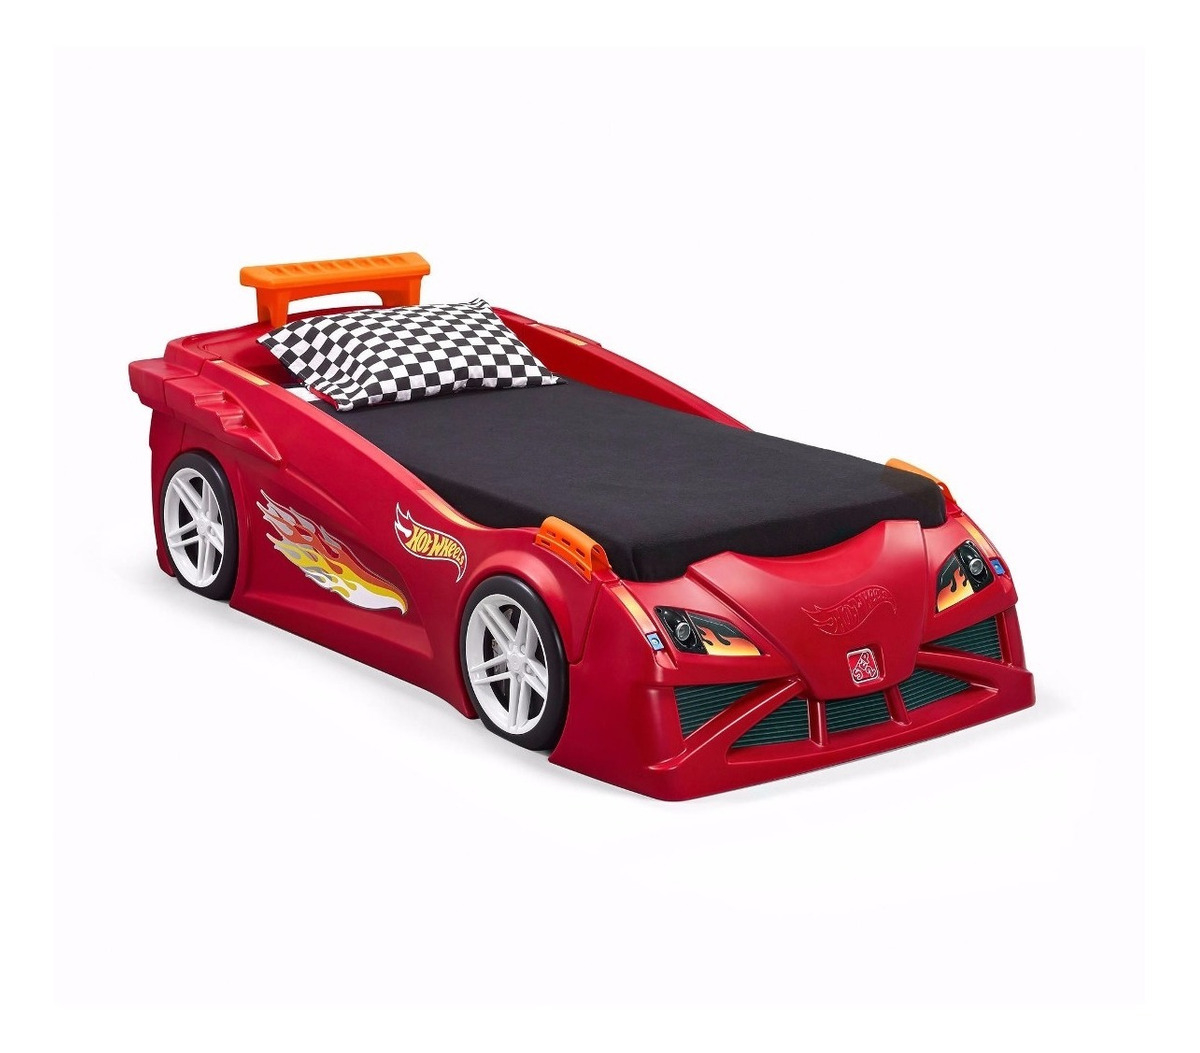 bedding & duvet cover 4 Kids 160x80cm Details about   Racing Car Childrens Bed with mattress 